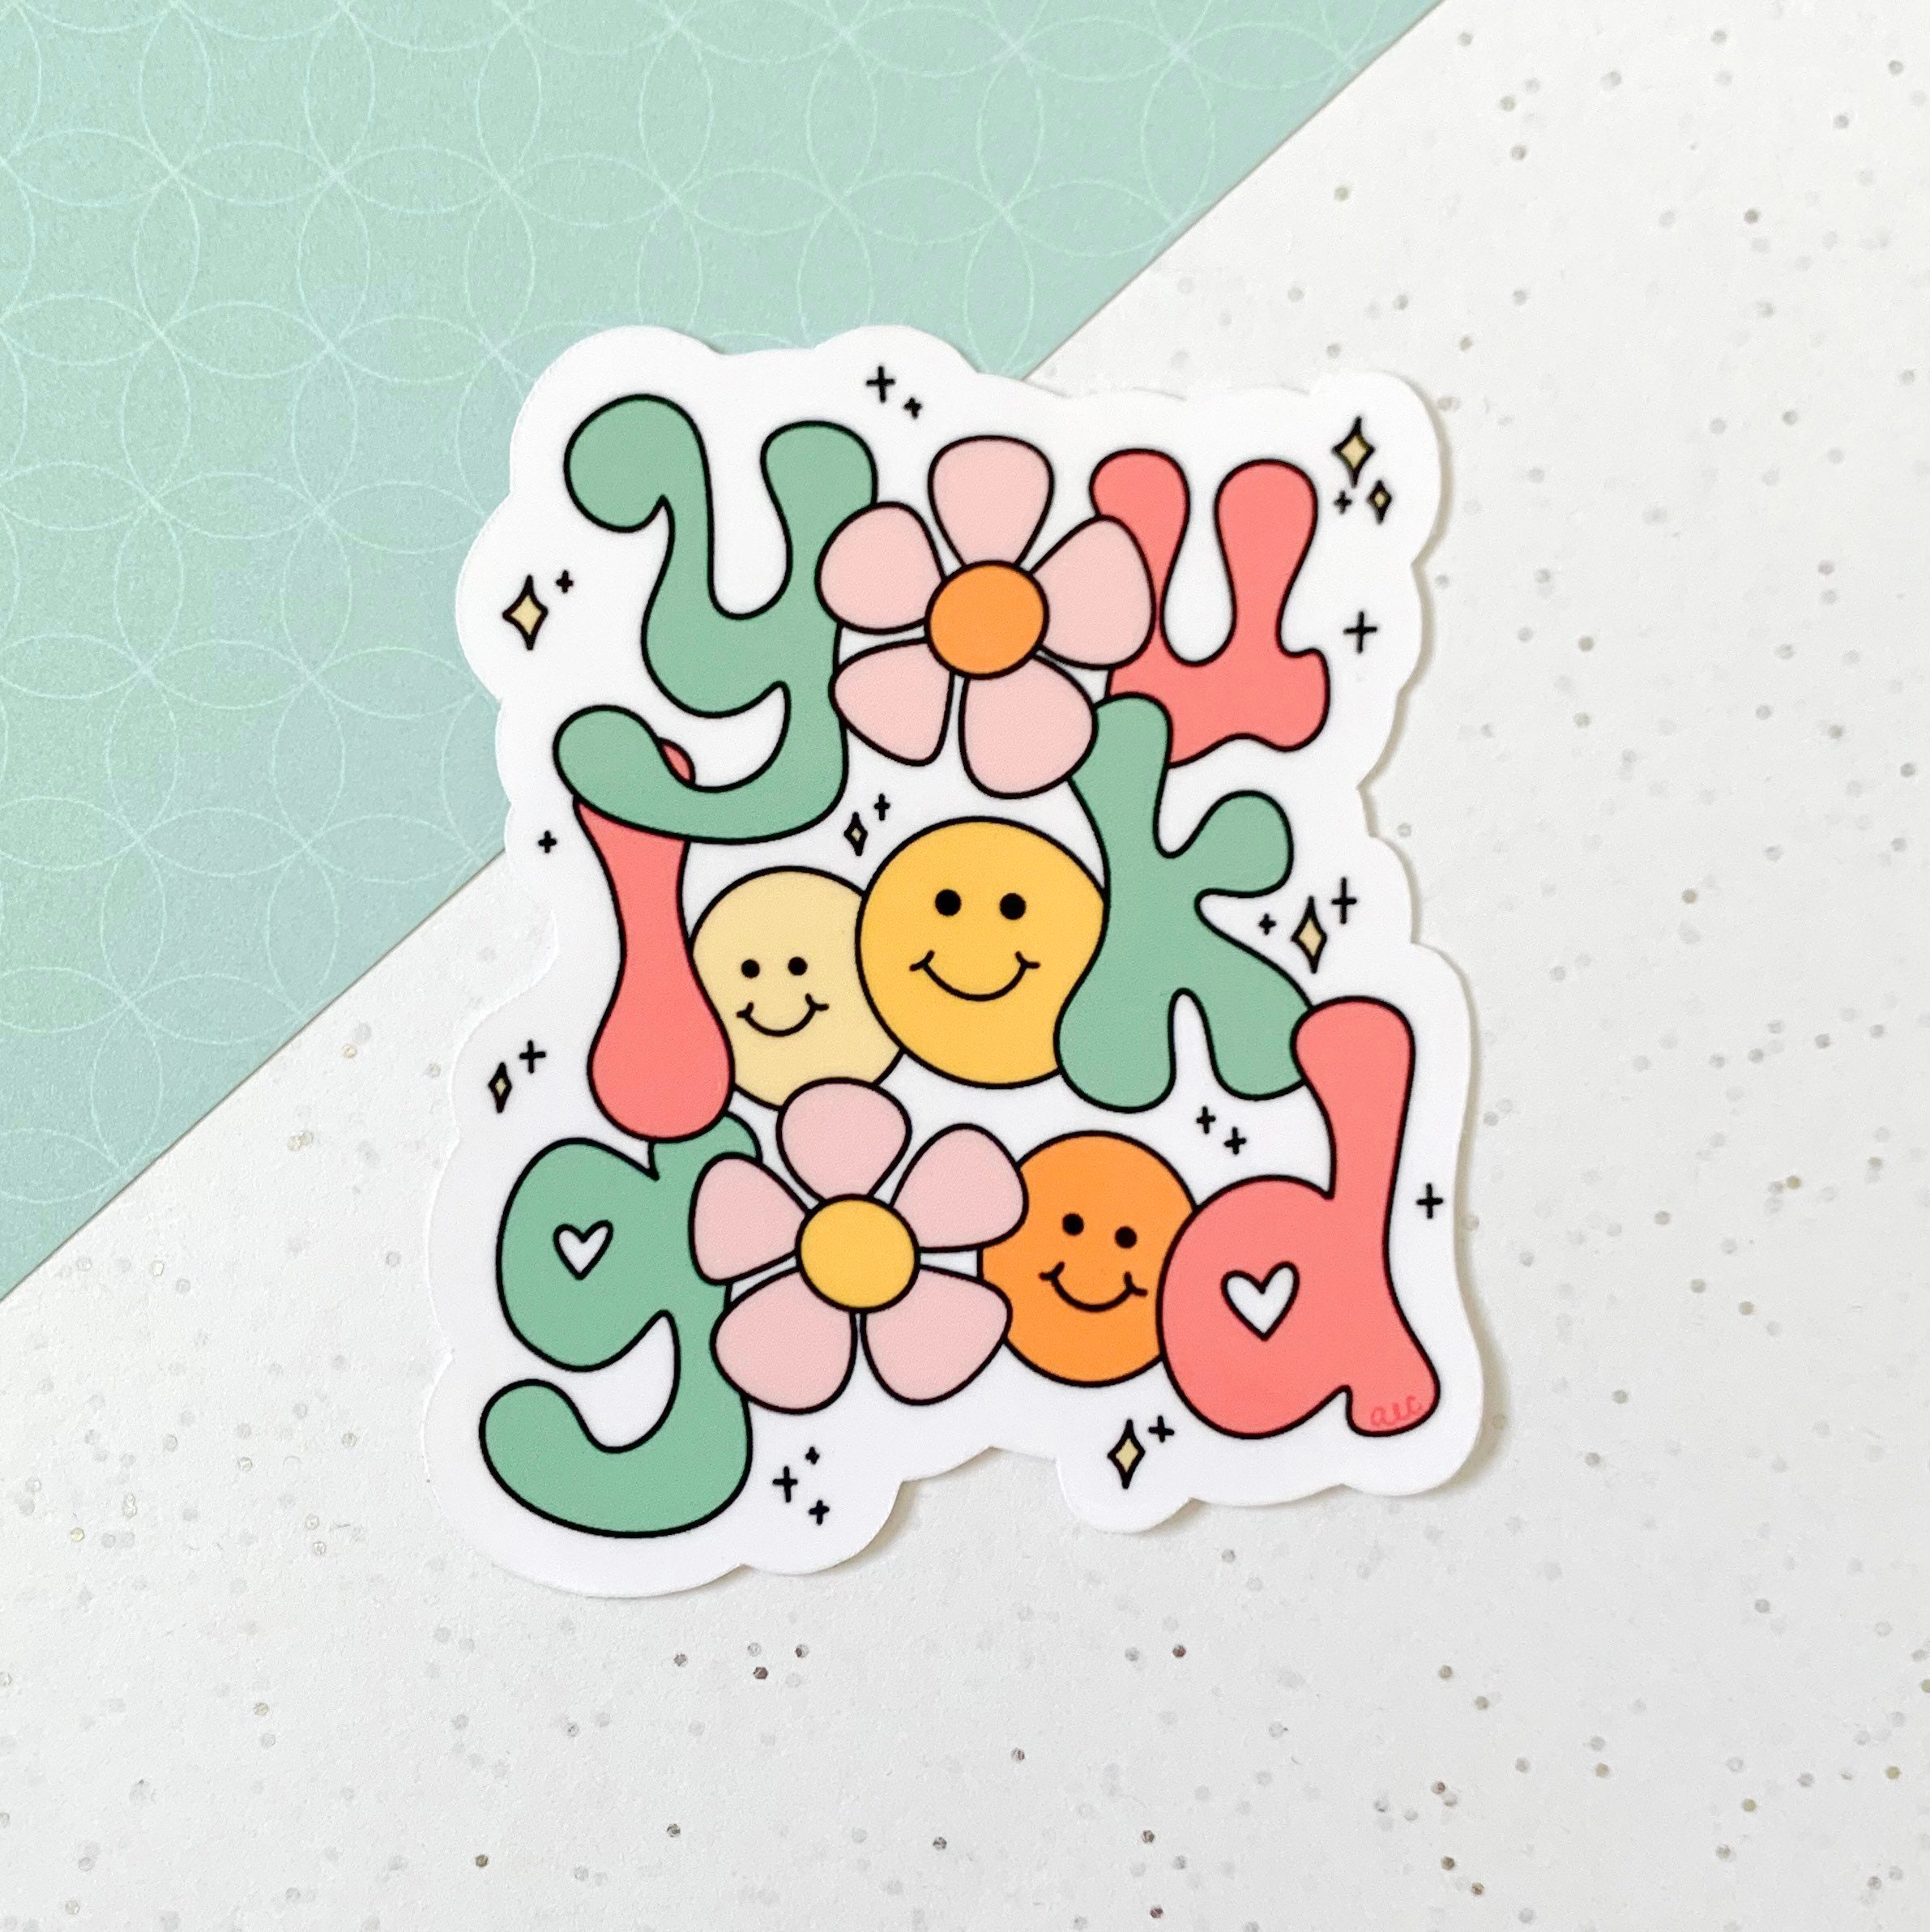 Choose Happy  Sticker for Sale by Crafty-10  Happy stickers, Preppy  stickers, Positivity stickers